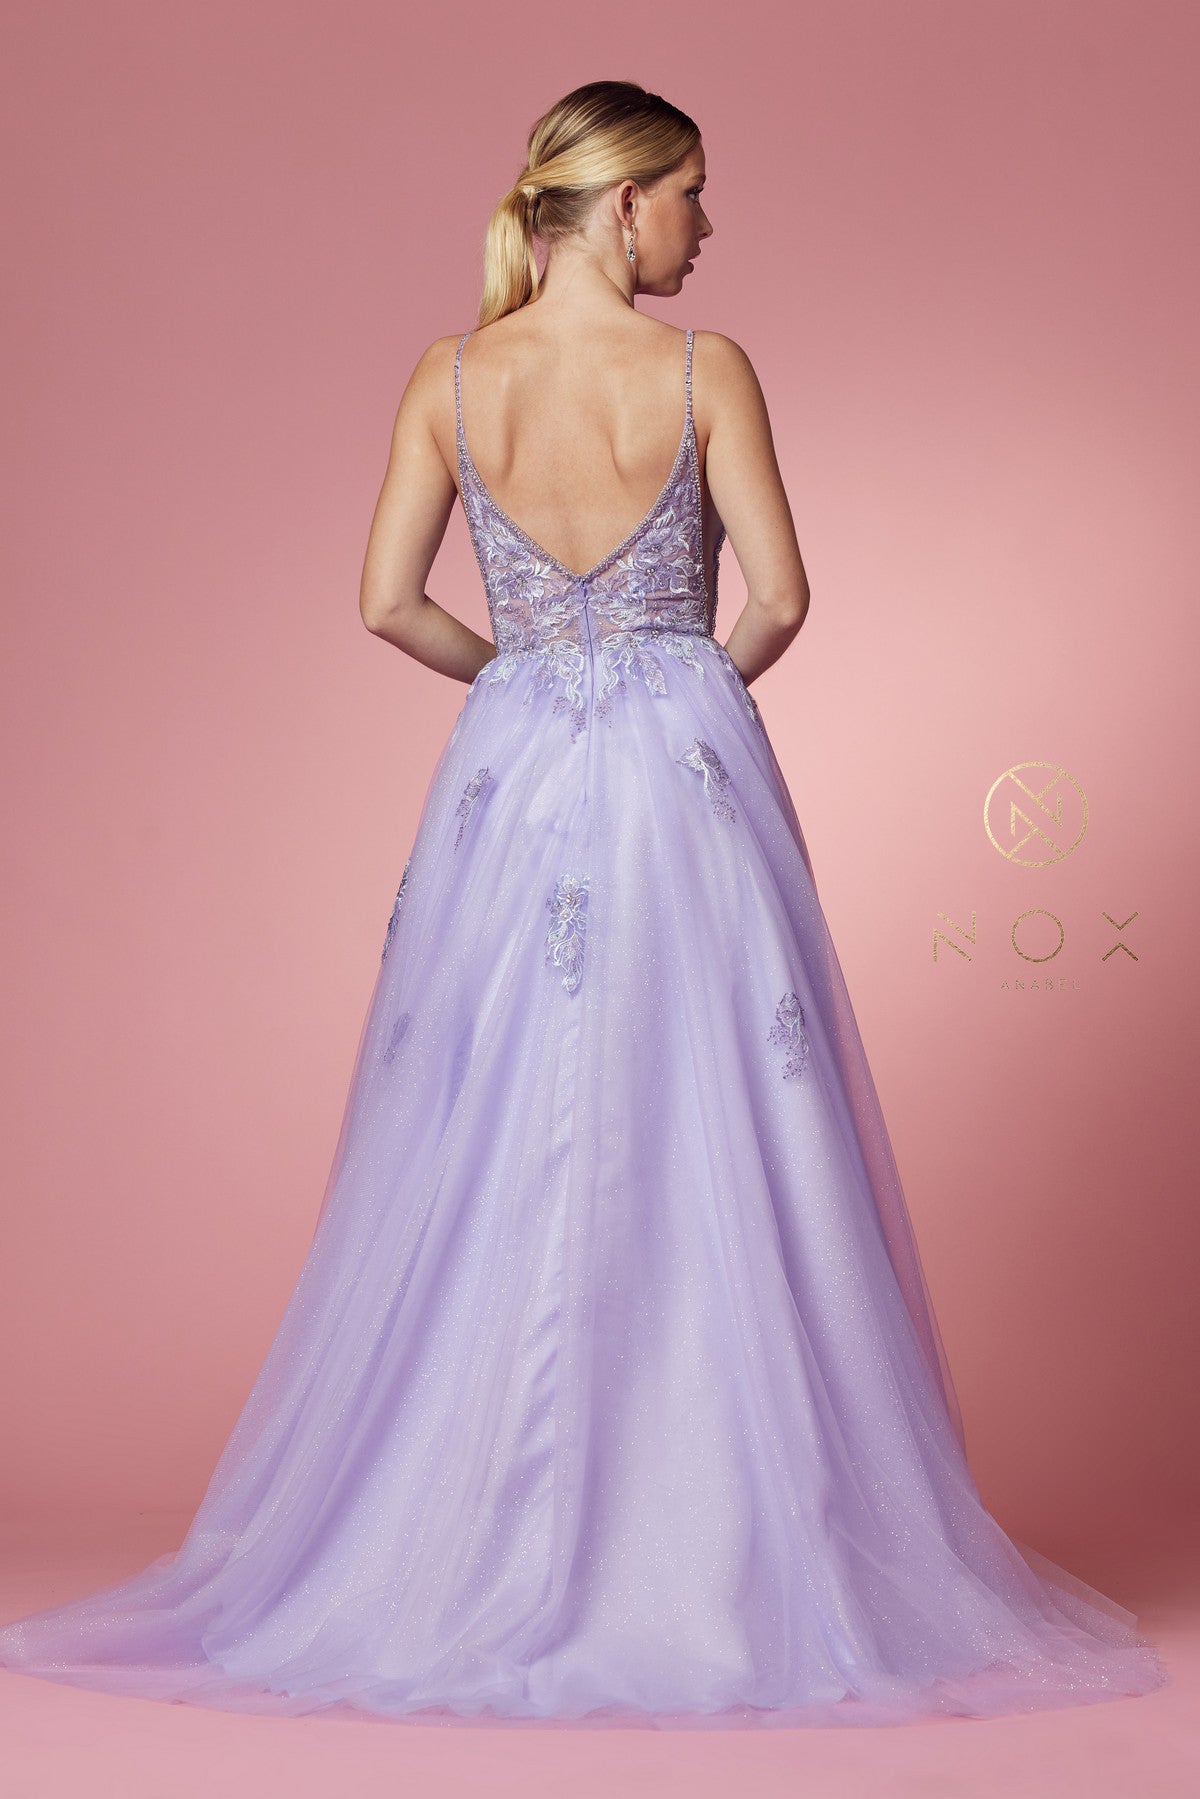 Nox Anabel T1012 Lilac Prom Dress.  DEEP V NECKLINE WITH MESH AND SIDE OPENED WITH MESH, BEAUTIFUL SHOULDER LINE CONNECTED TO THE BODICE, FLOWERS EMBELLISHMENT COVERED BOTH FRONT AND BACK.